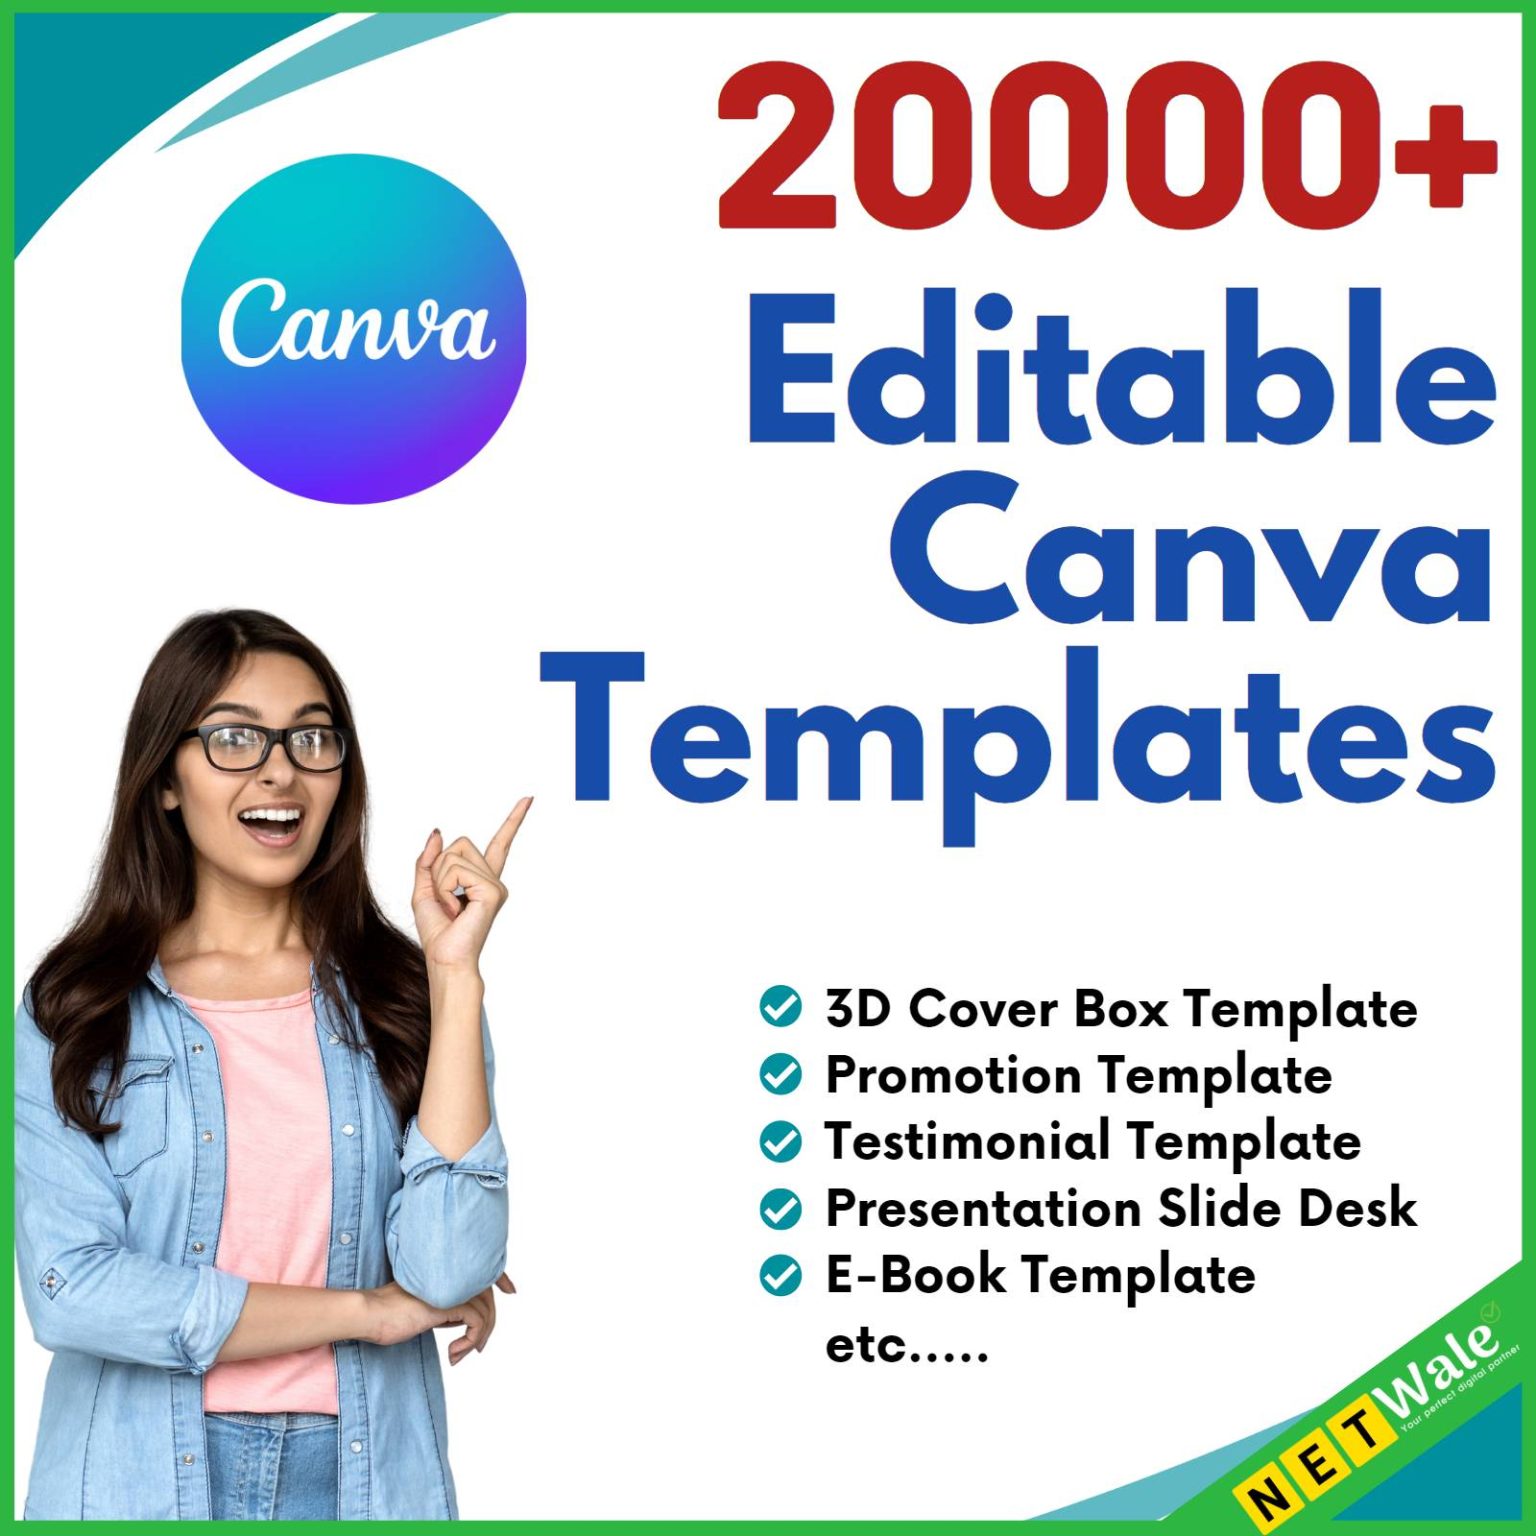 learn-selling-canva-templates-like-the-pros-in-just-3-days